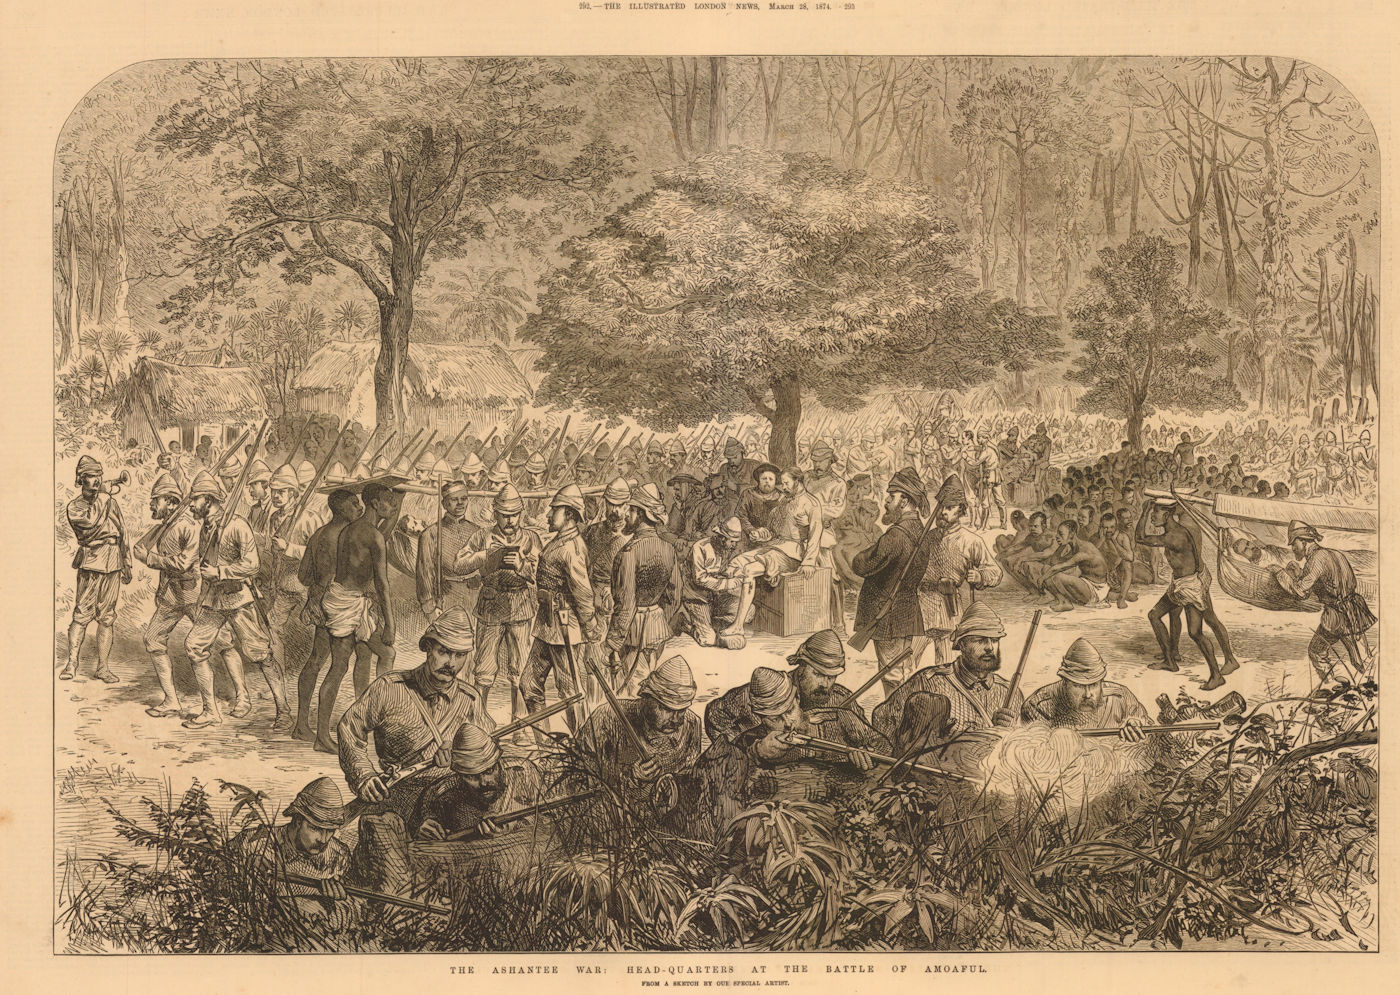 The Third Anglo-Ashanti War: Headquarters at the Battle of Amoaful. Ghana 1874